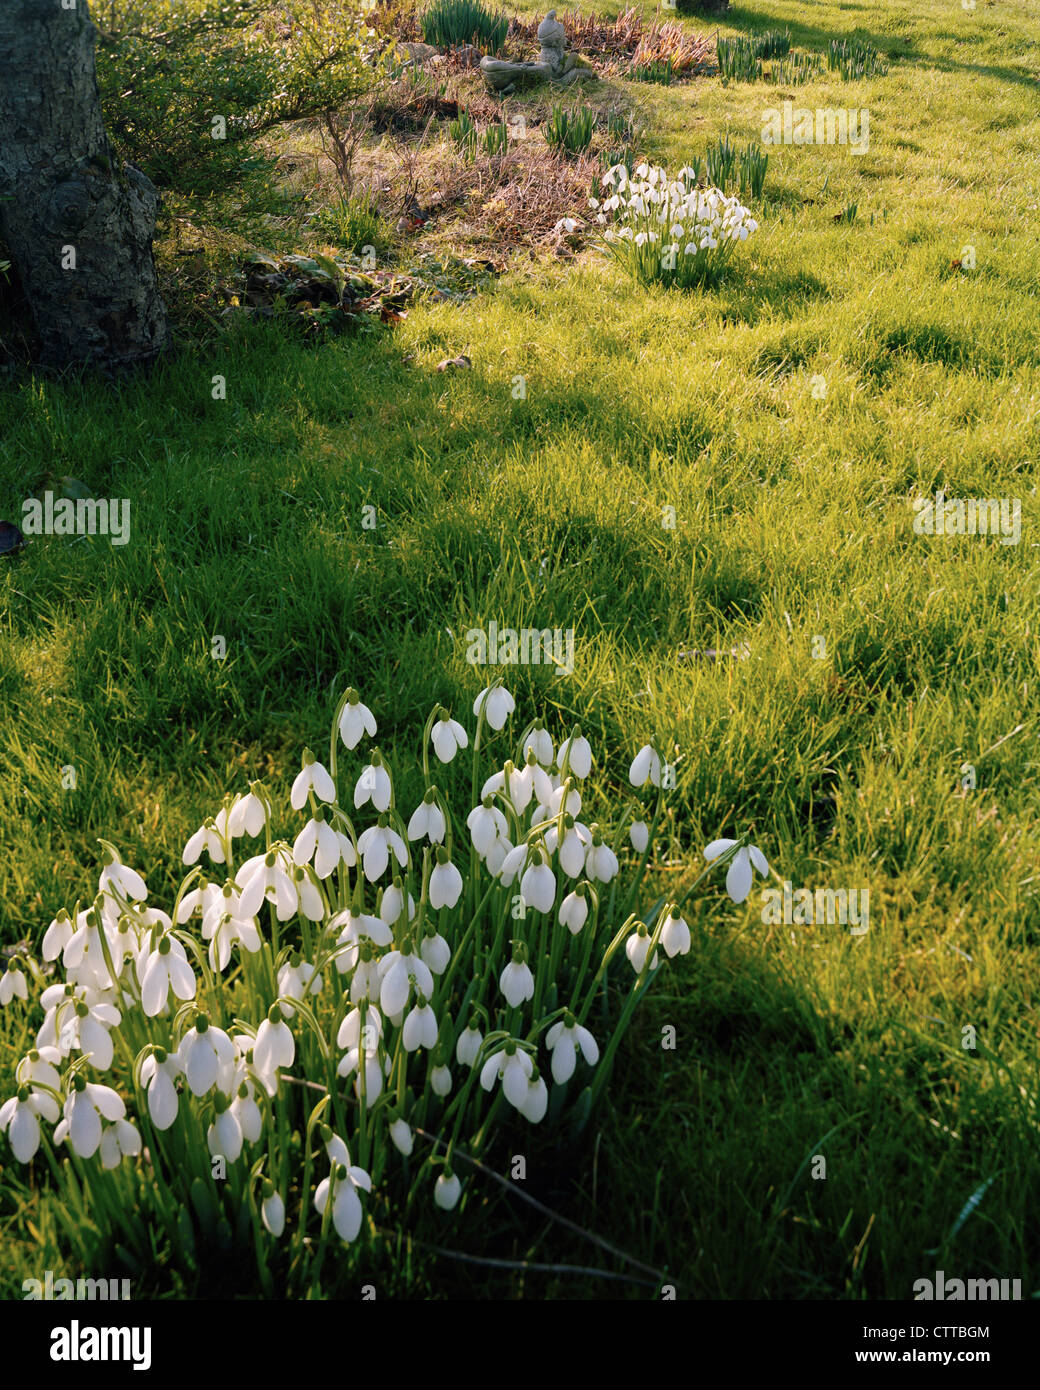 Two clumps of snowgrops naturalised in garden grass Stock Photo